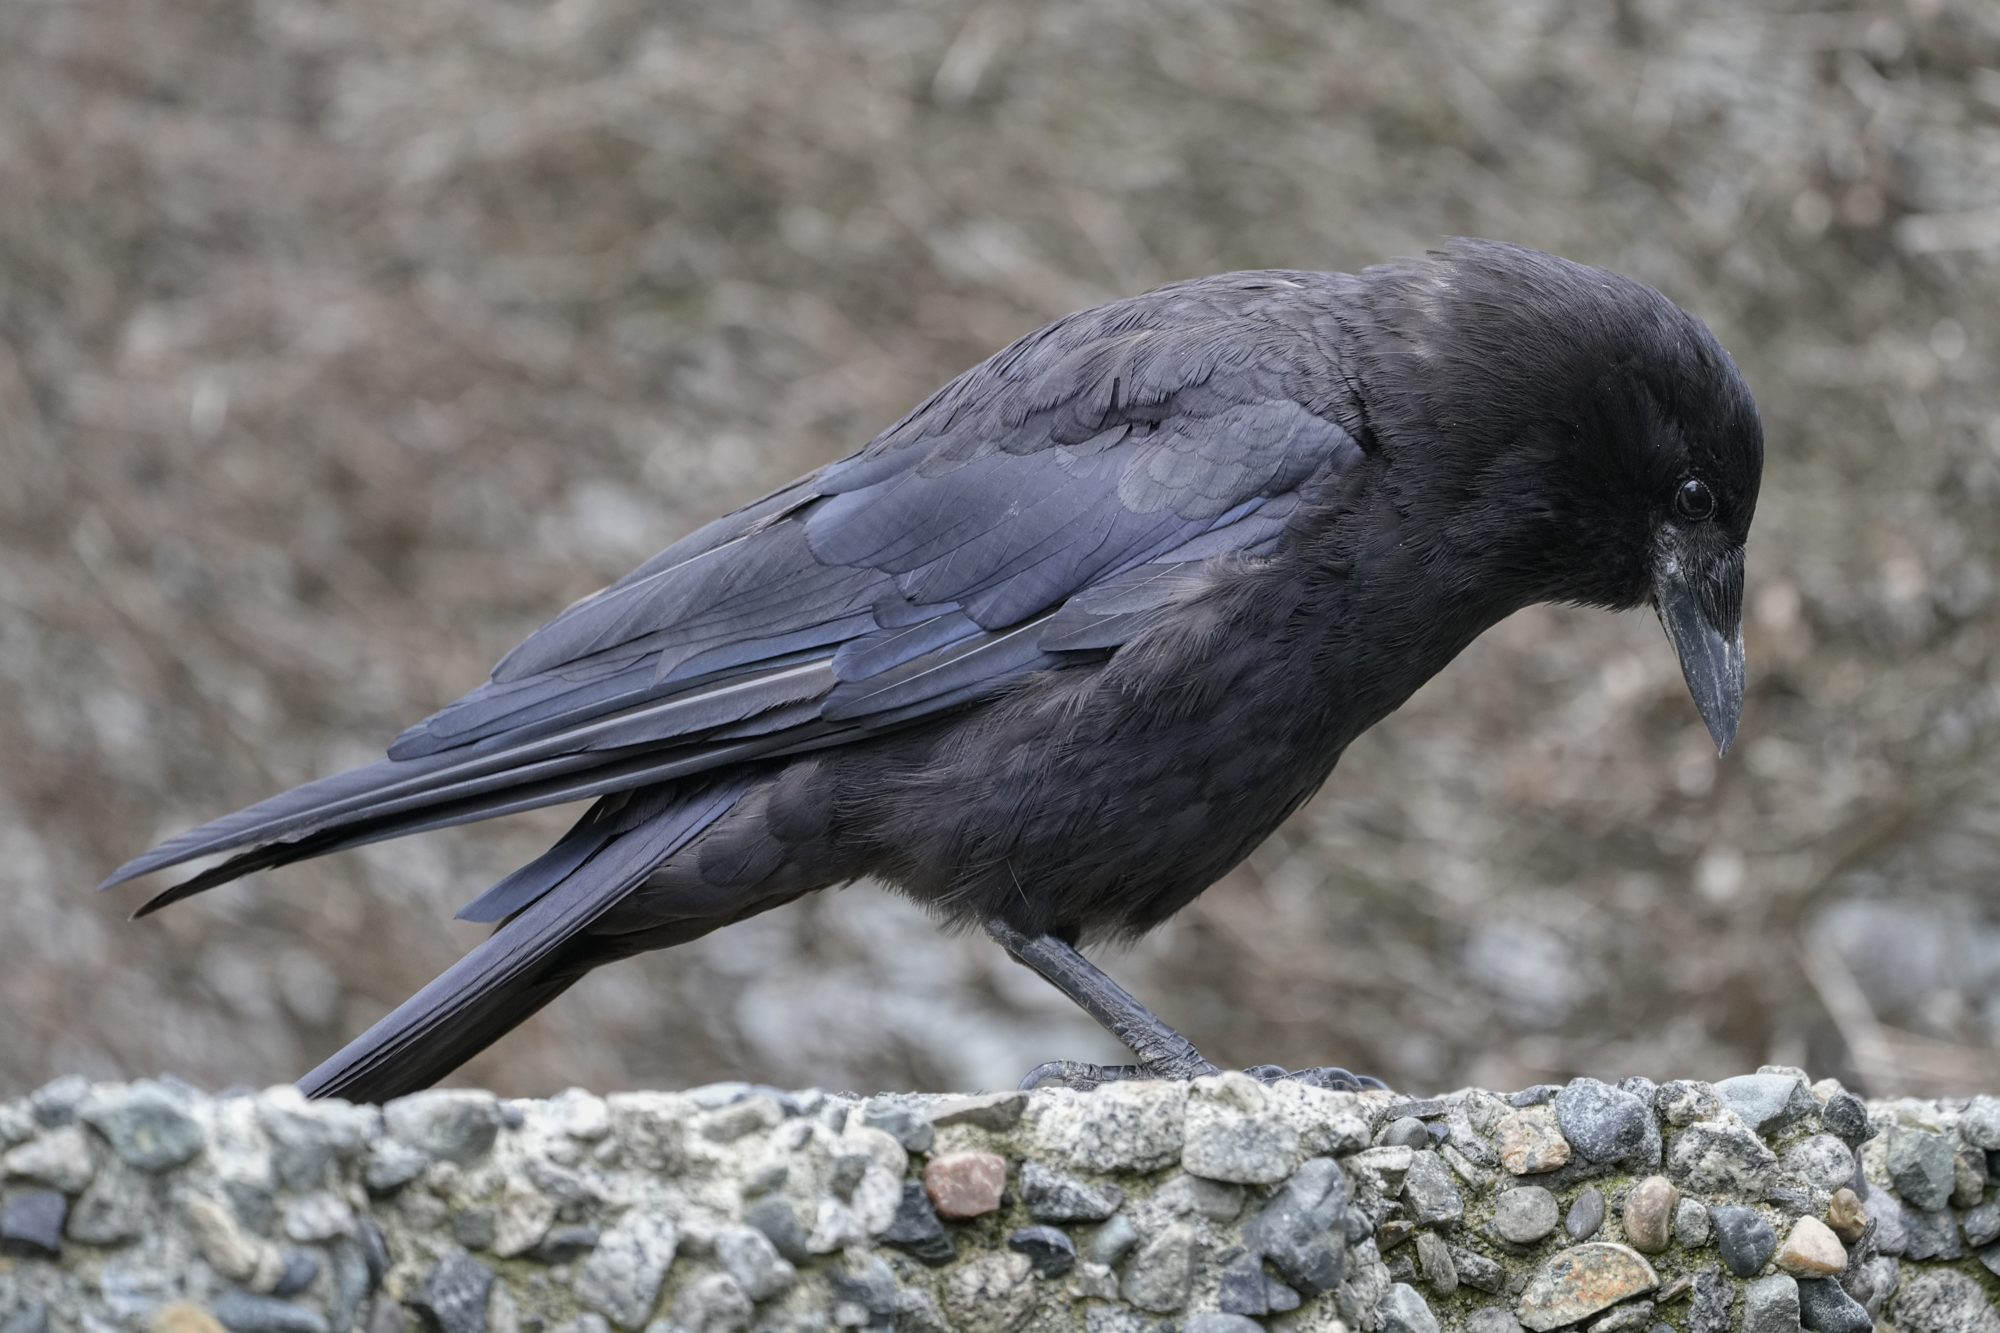 A crow is standing on a stone ledge, looking down